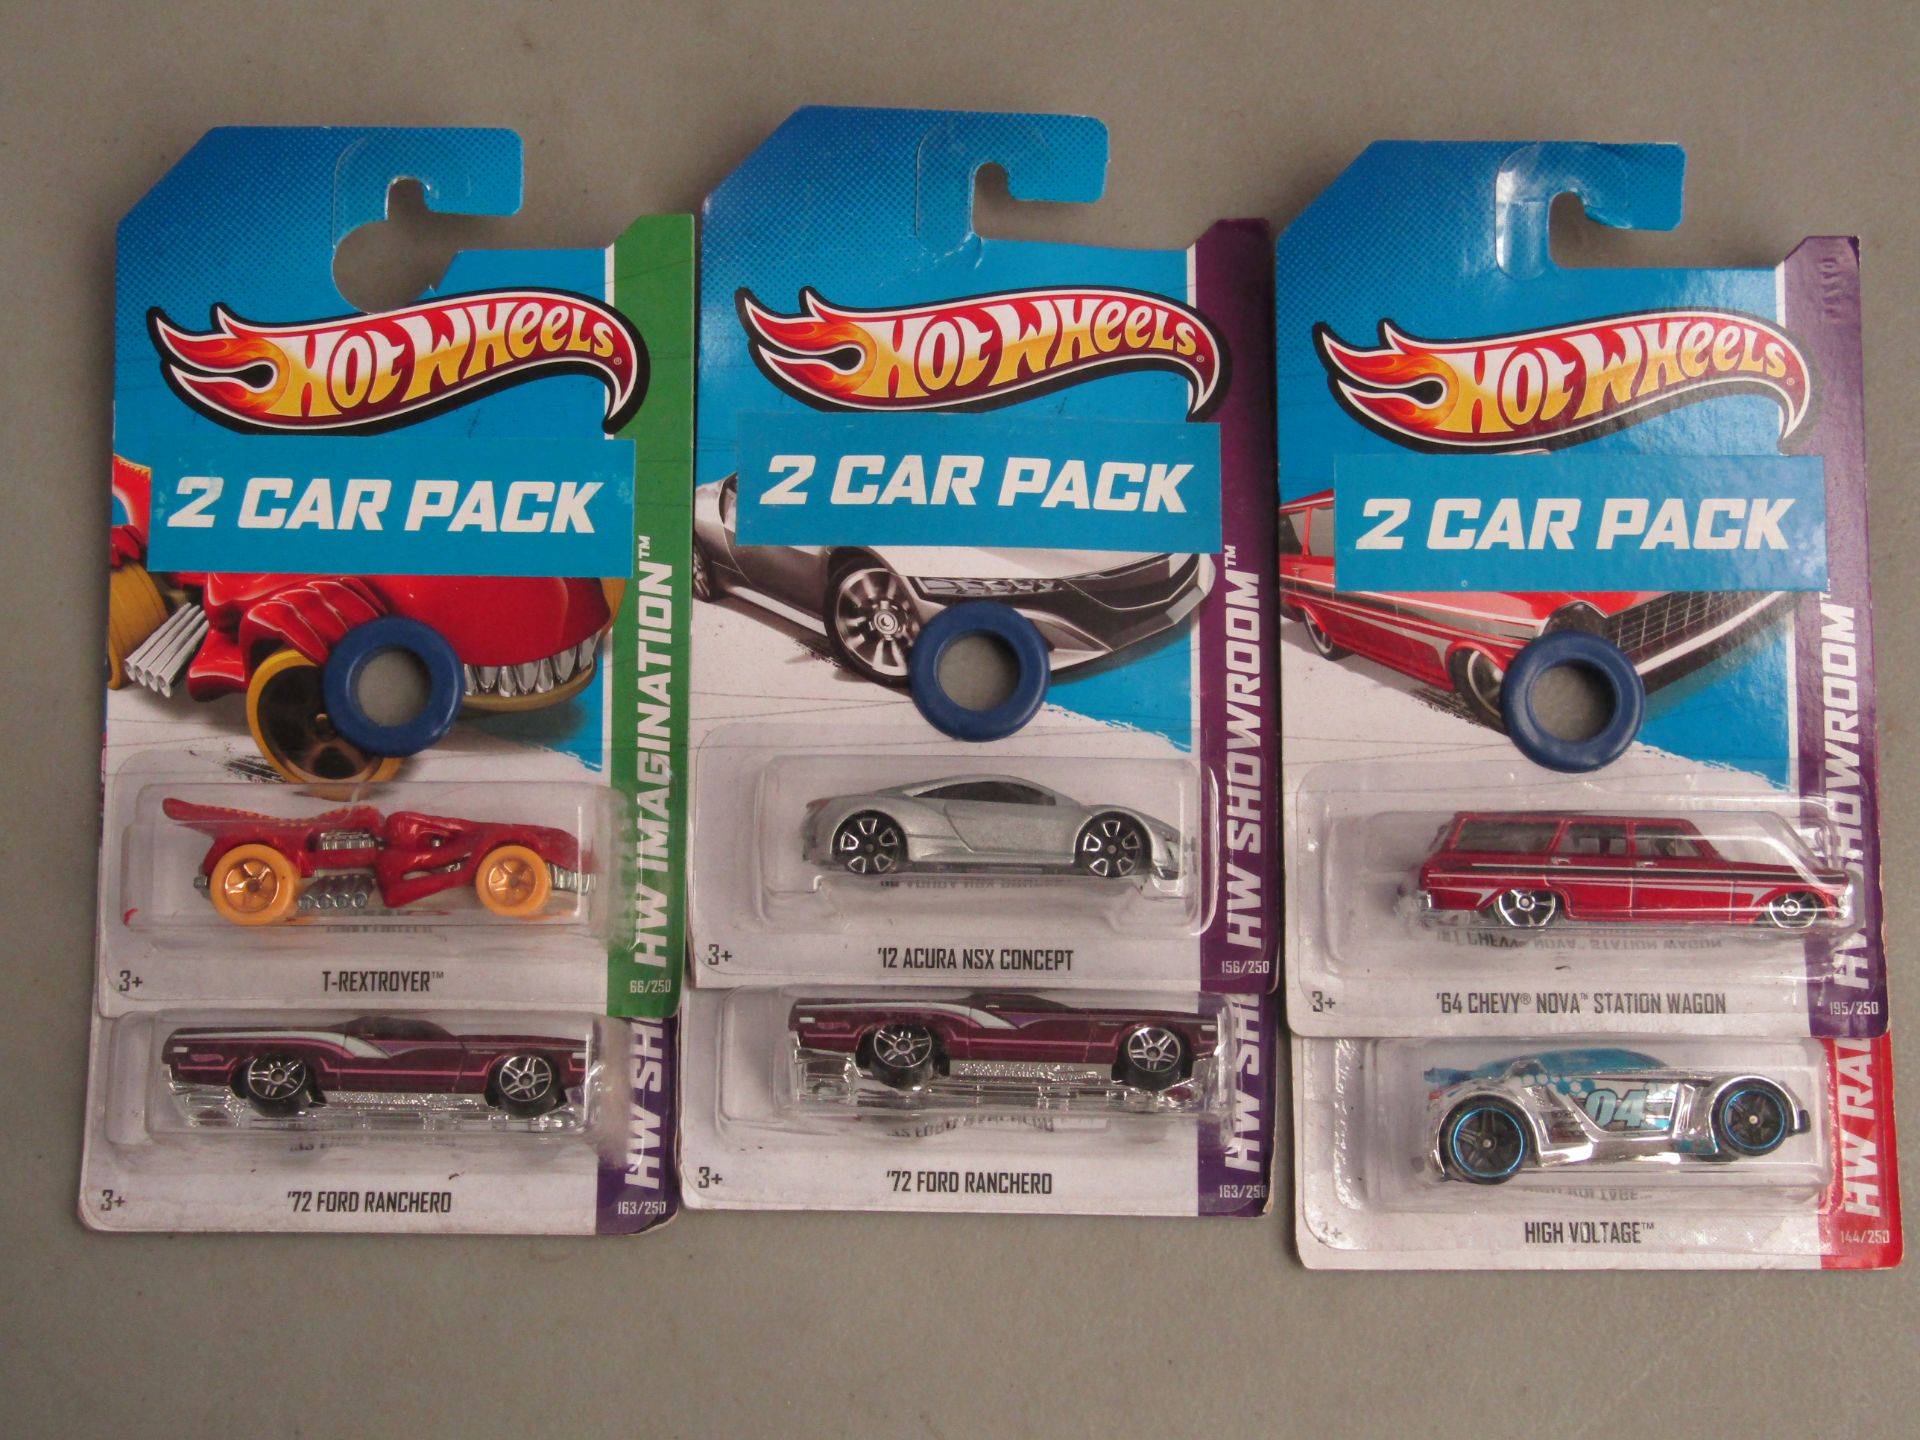 3x Pack of 2 Hot Wheels Cars. All New In Packaging (Picture is for Display Only, This Lot will be